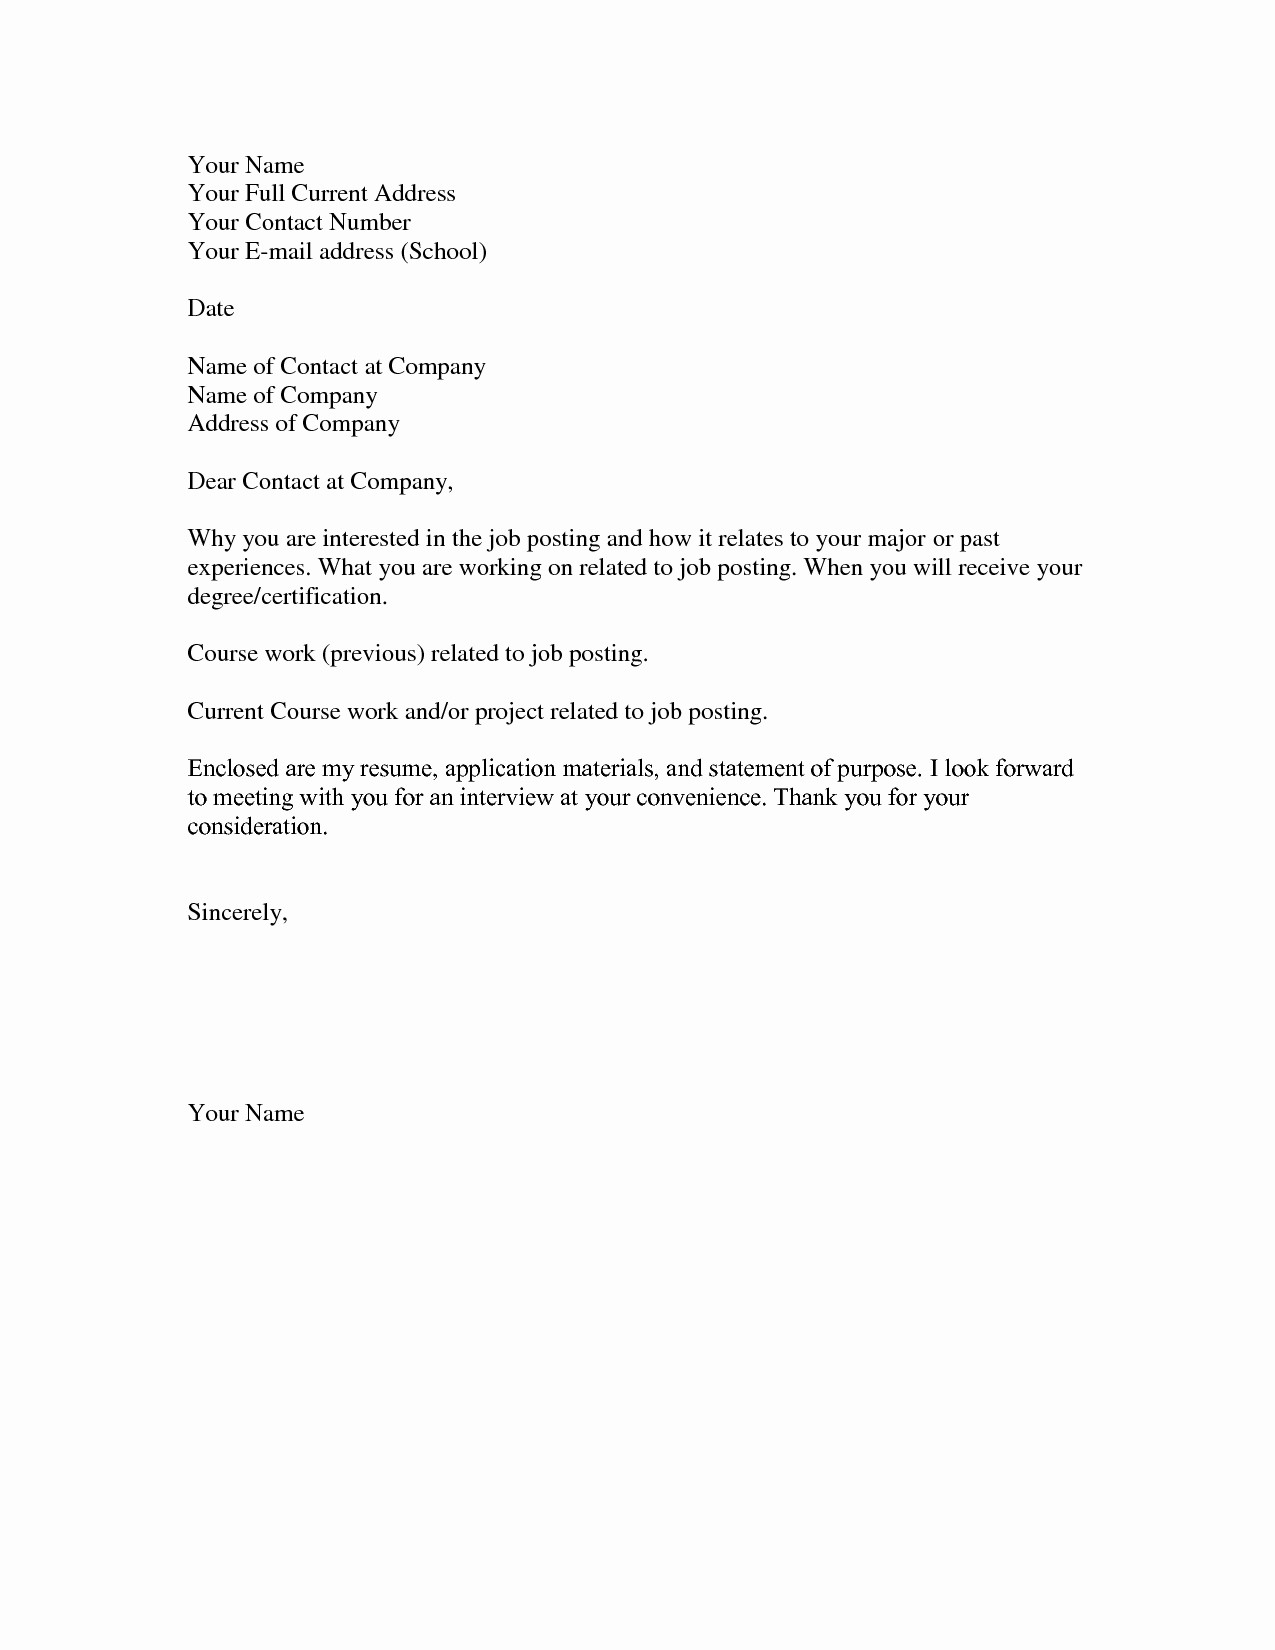 Short and Simple Cover Letters New Basic Cover Letter for A Resume